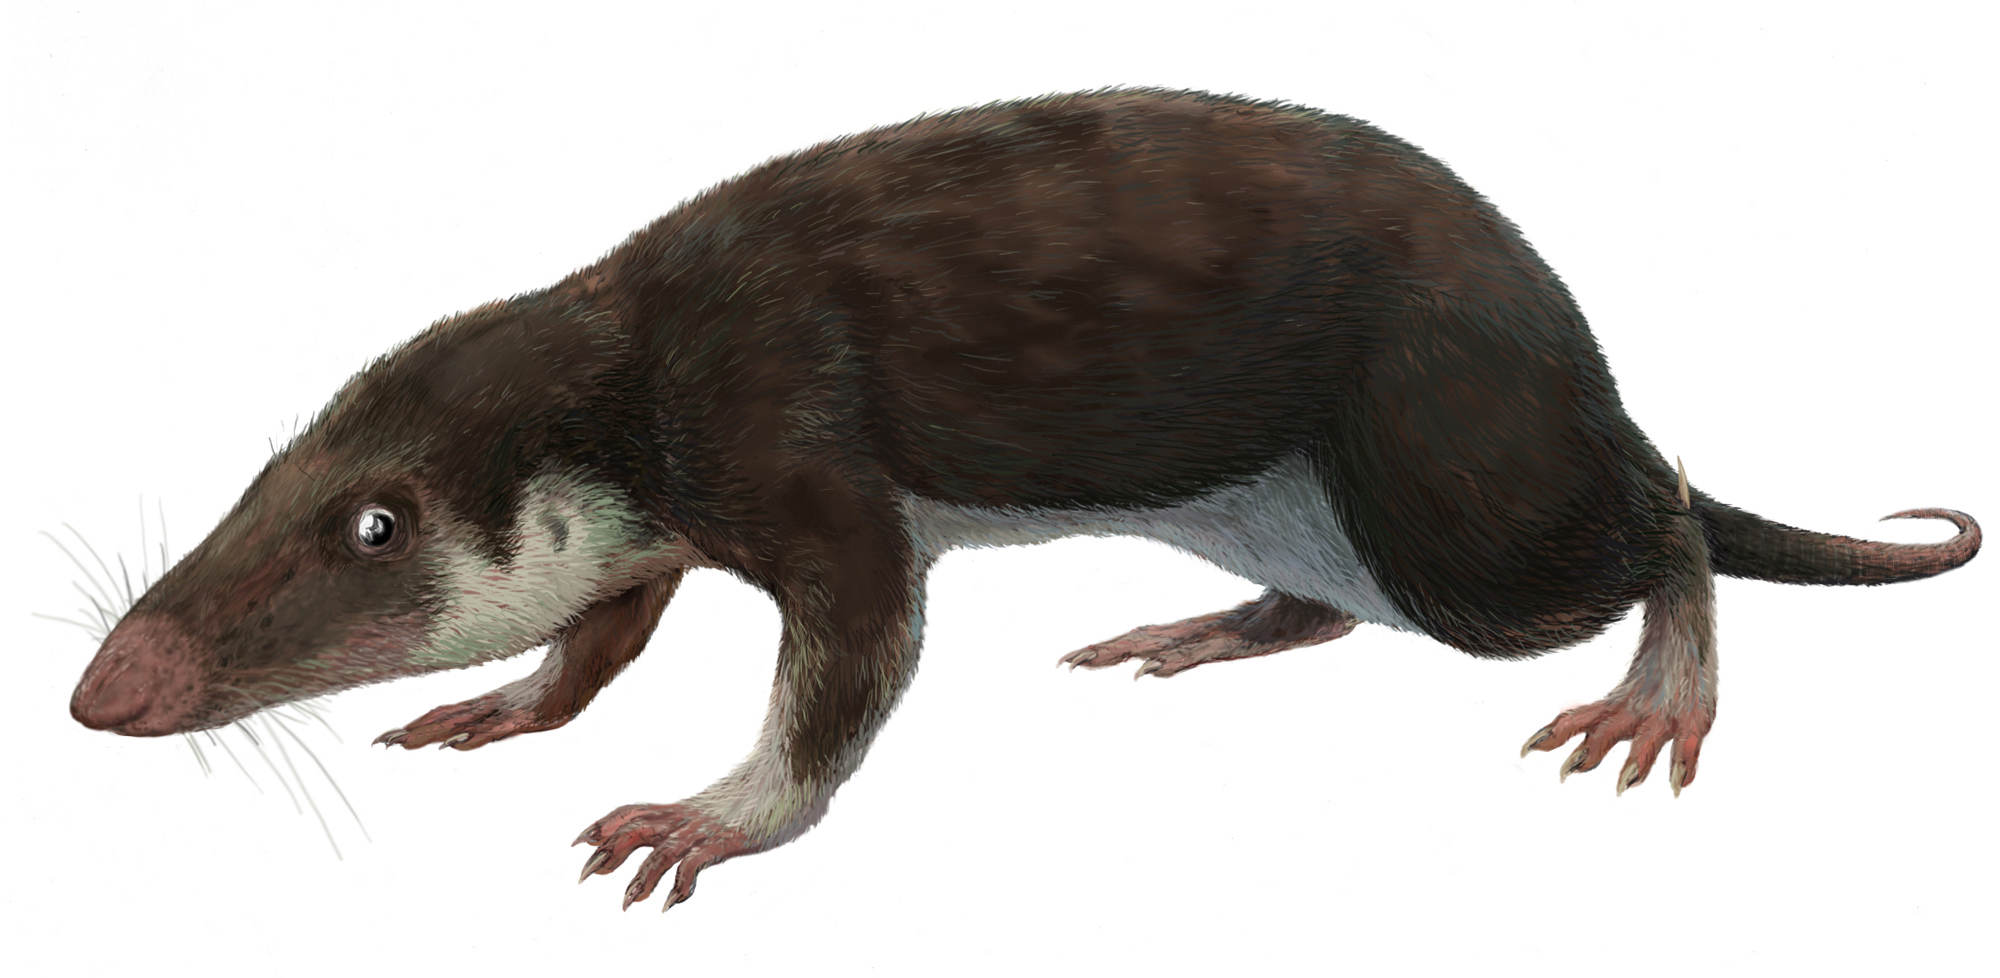 Artist drawing of Morganucodon watsoni. Shrewlike in appearance with pointed rostrum with small eyes and large whiskers. Undersides are white. Body has more upright posture with longer tail.